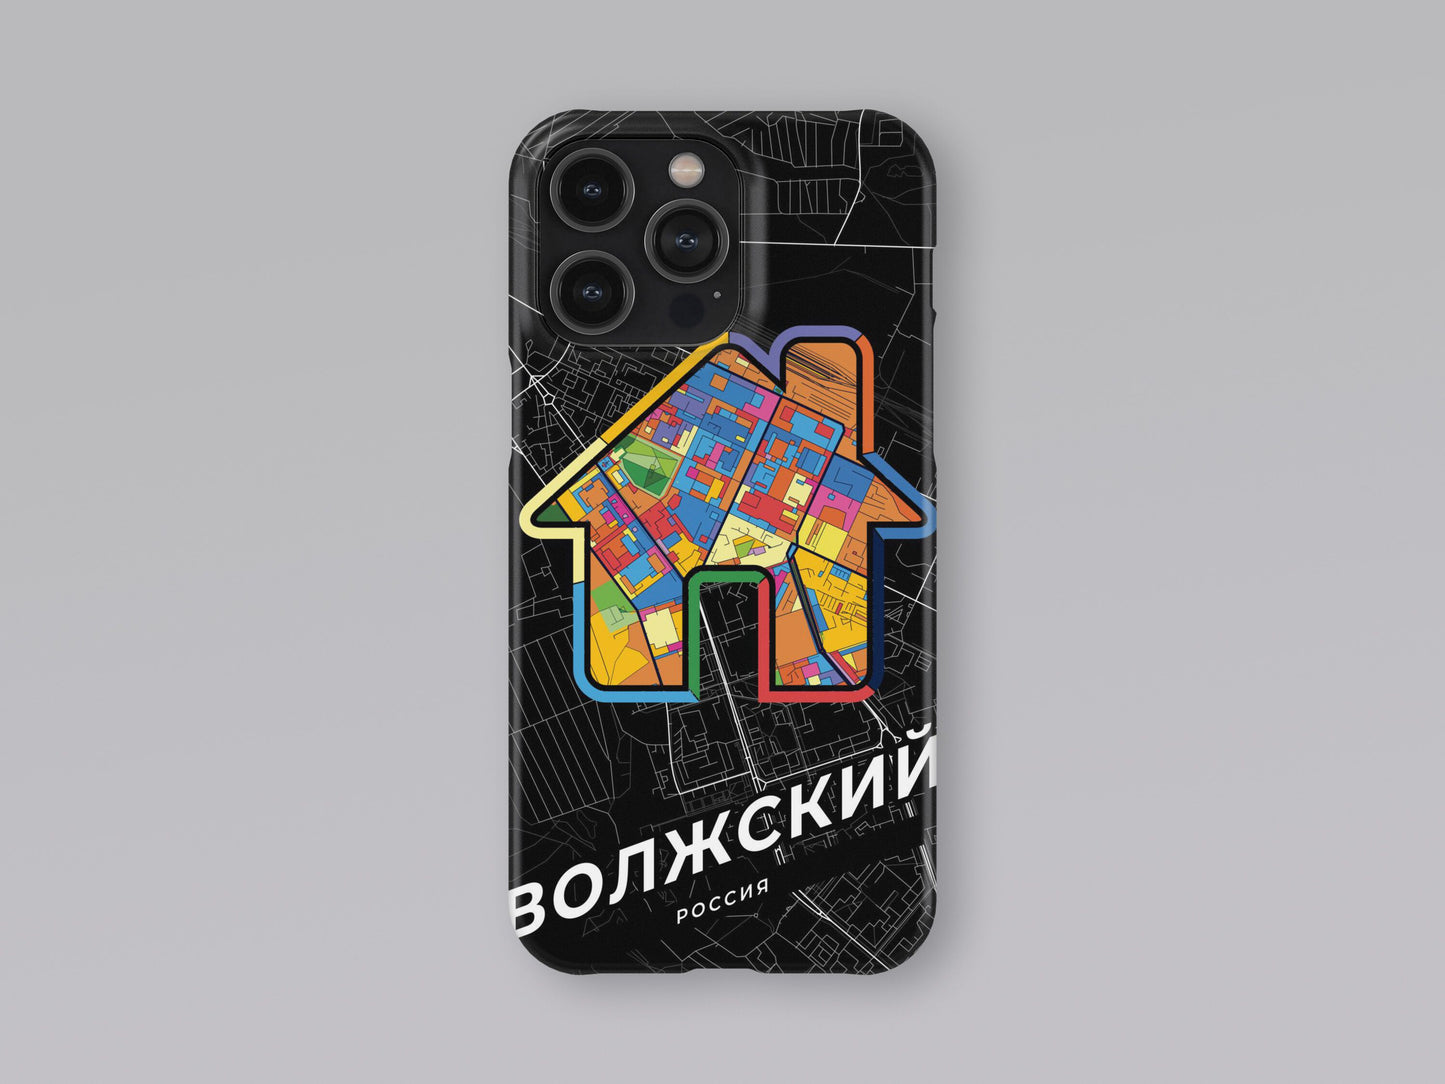 Volzhsky Russia slim phone case with colorful icon 3